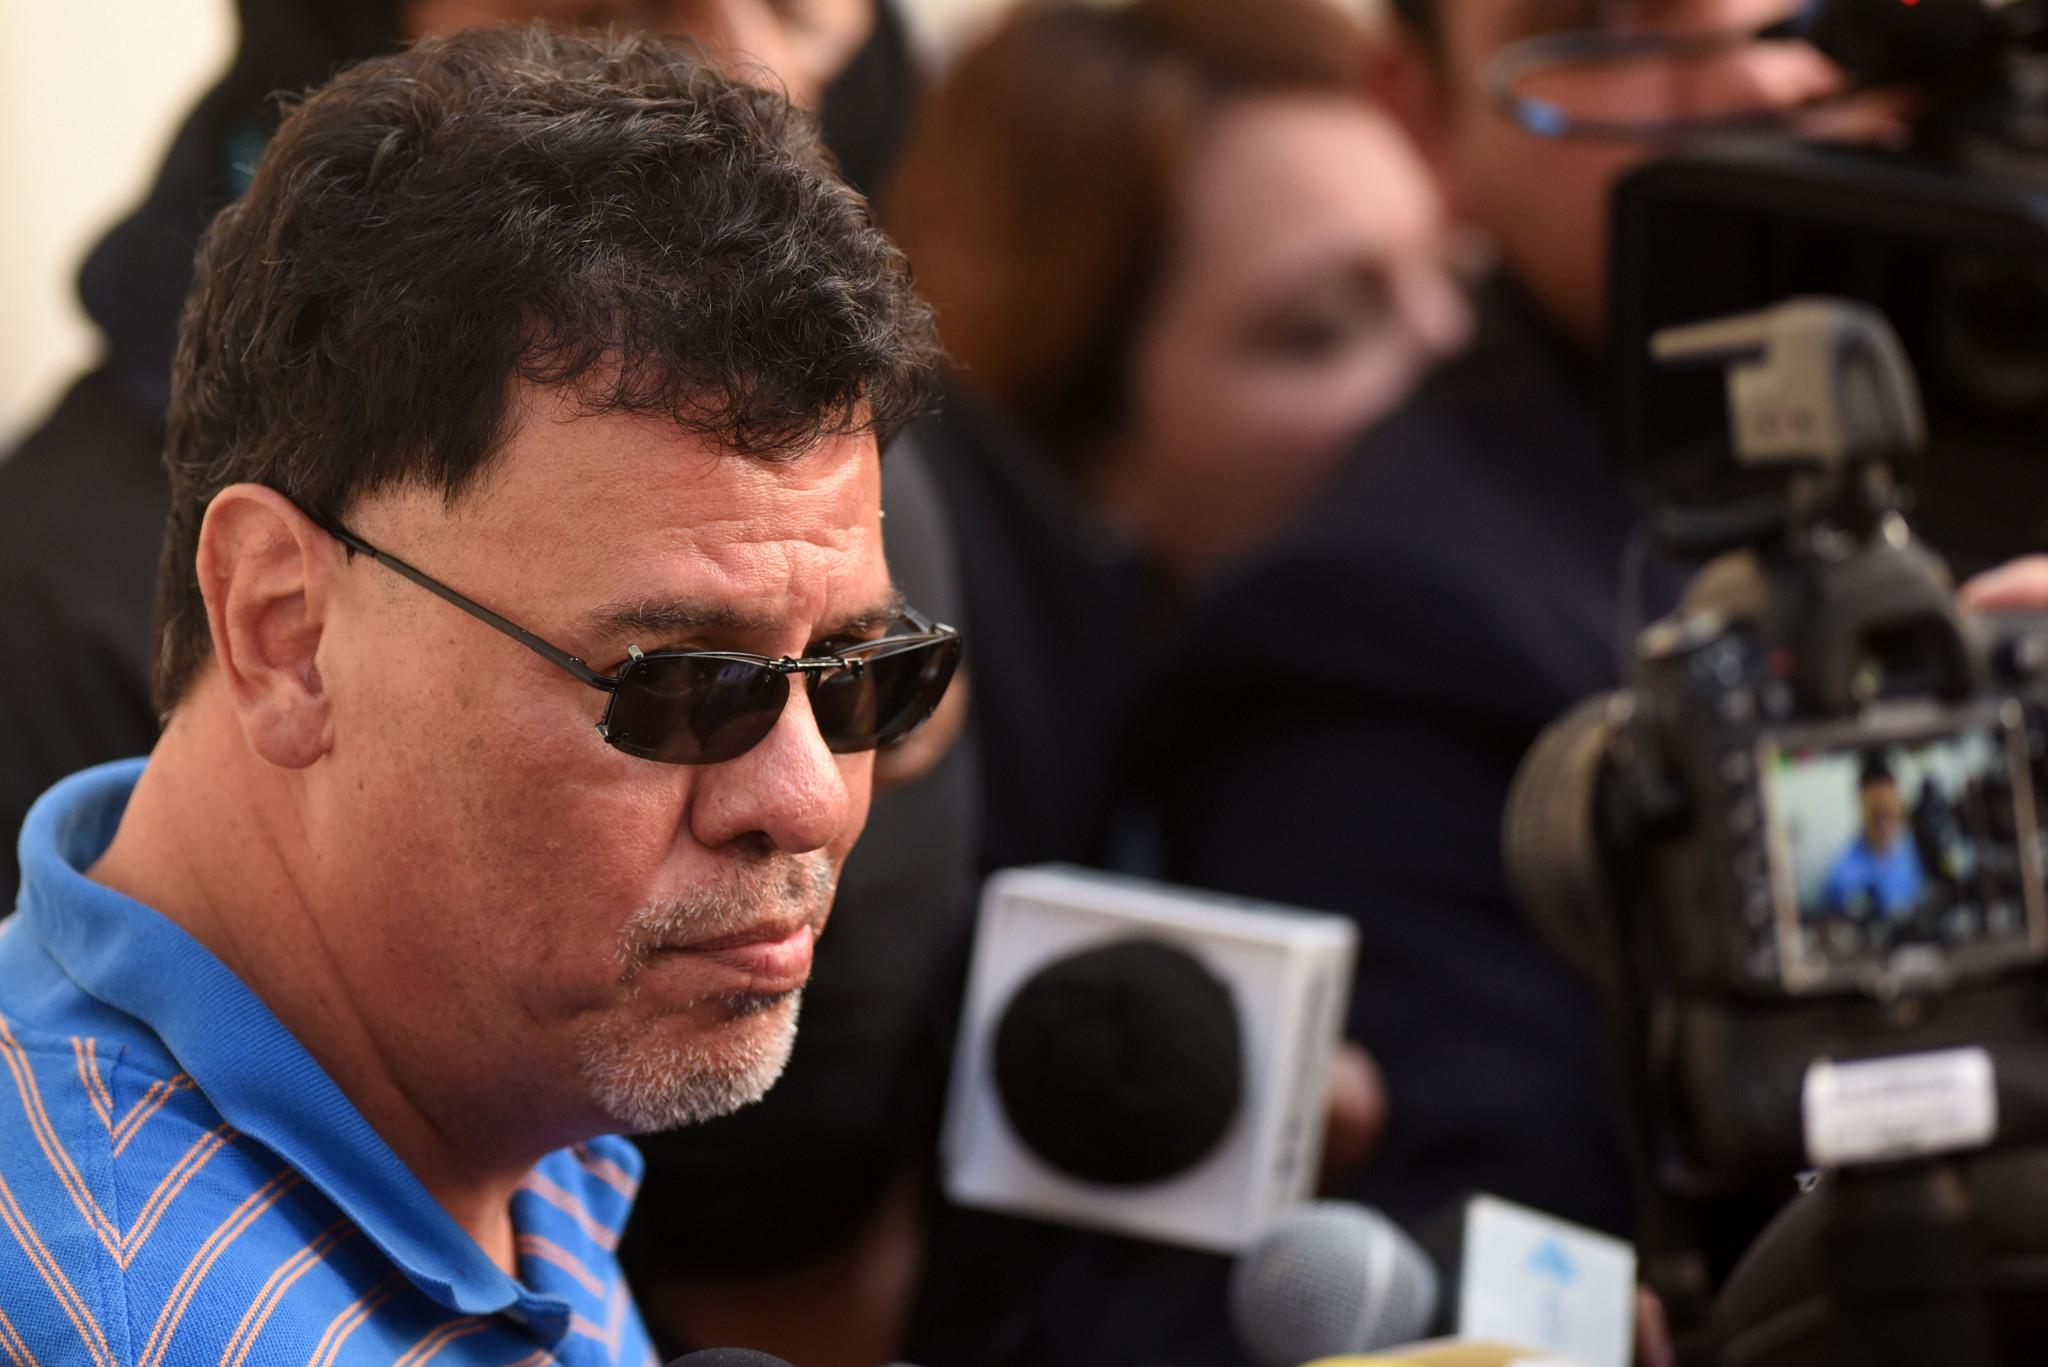 Former El Salvador football chief jailed for involvement in bribery scandal